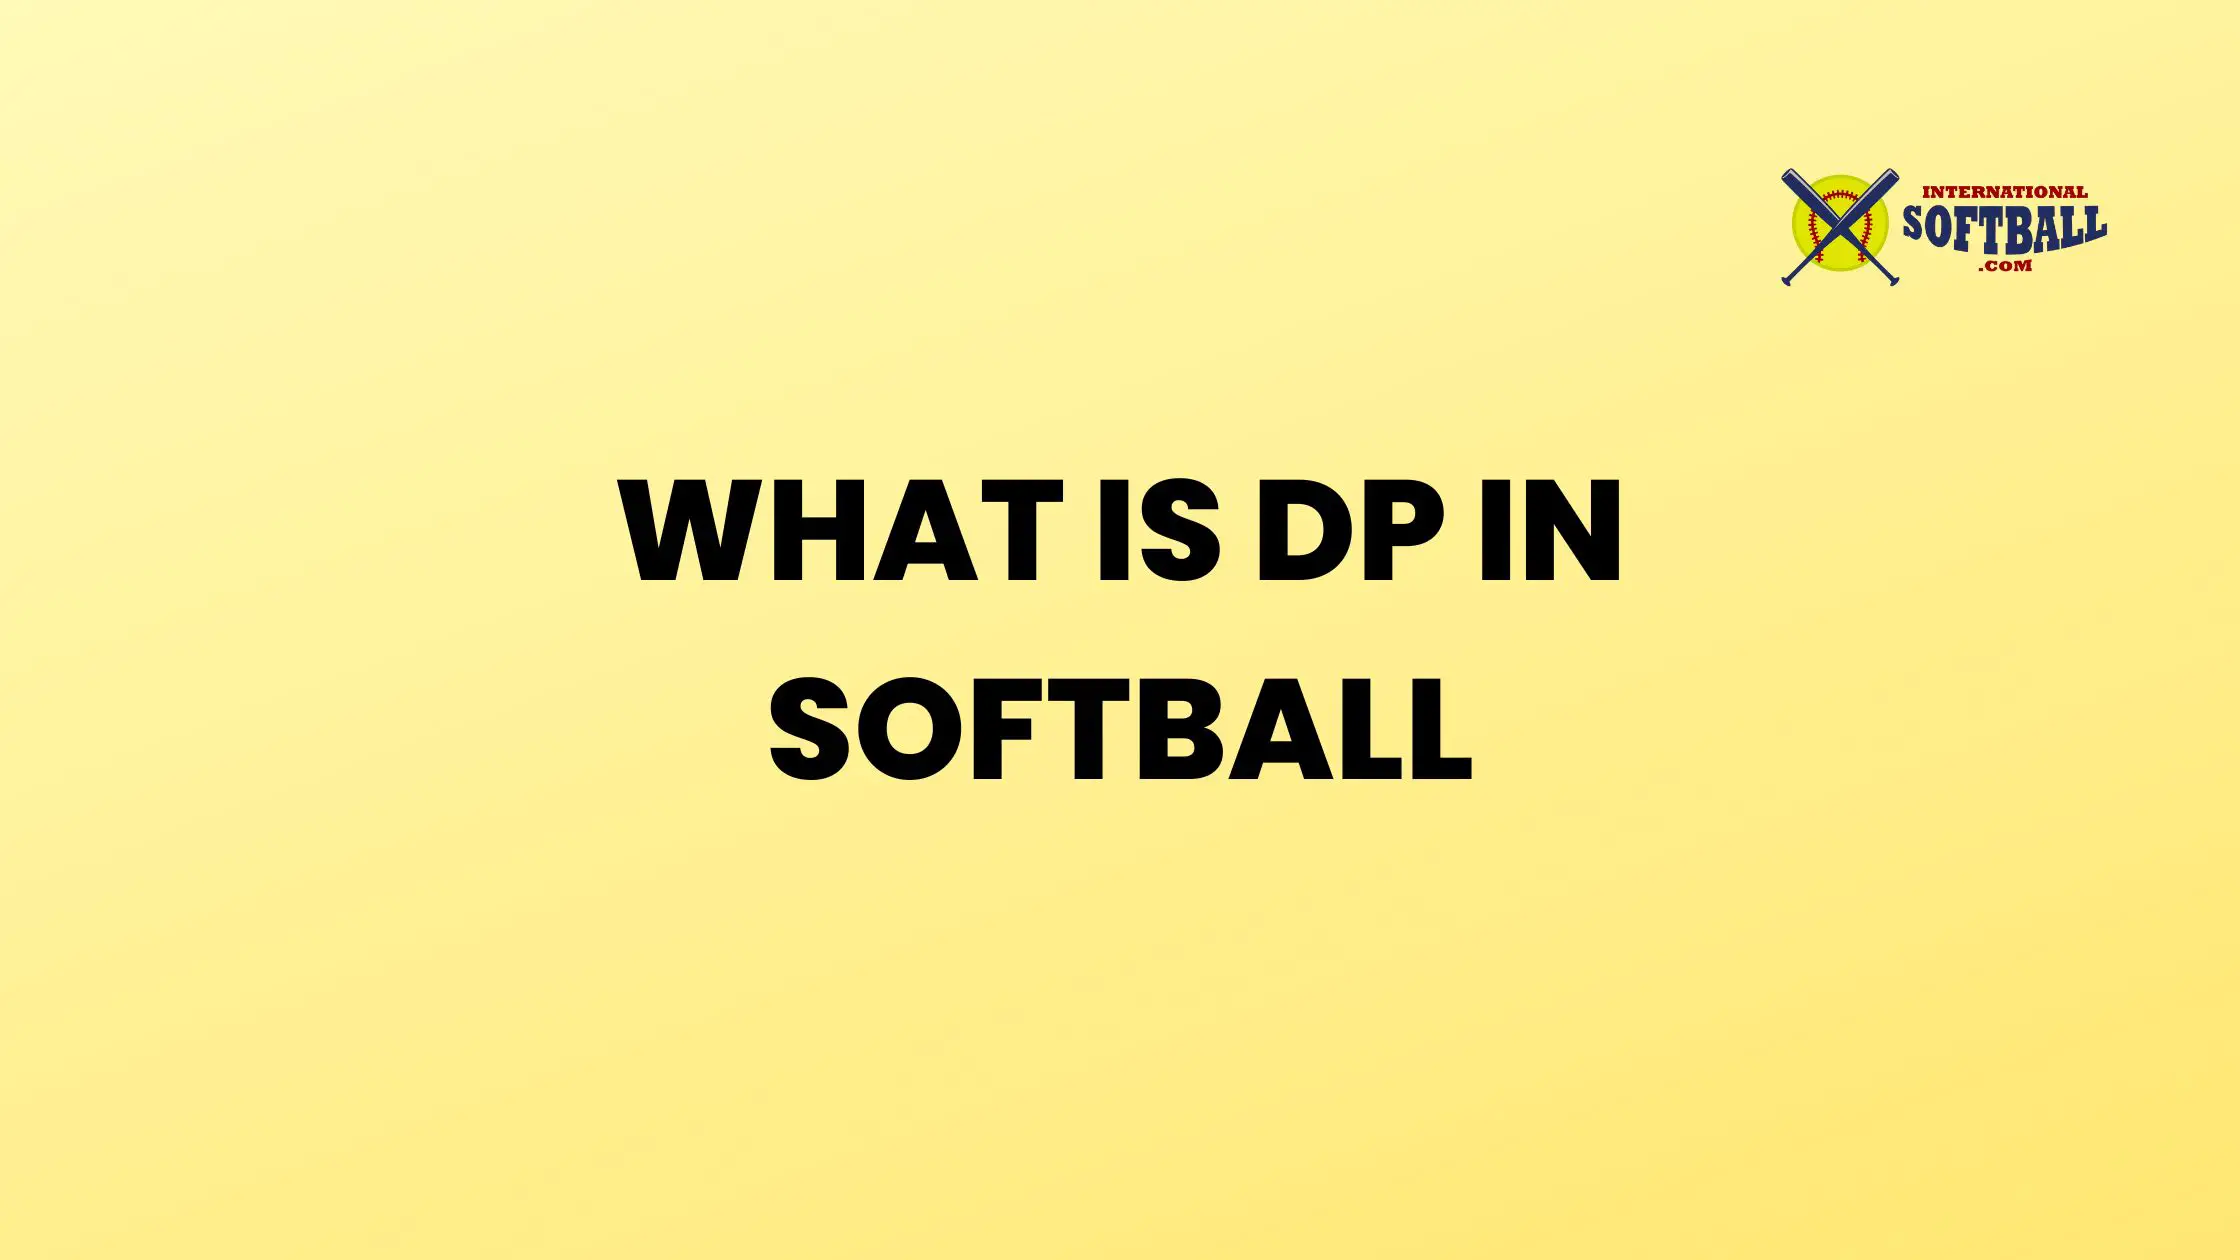 WHAT IS DP IN SOFTBALL?